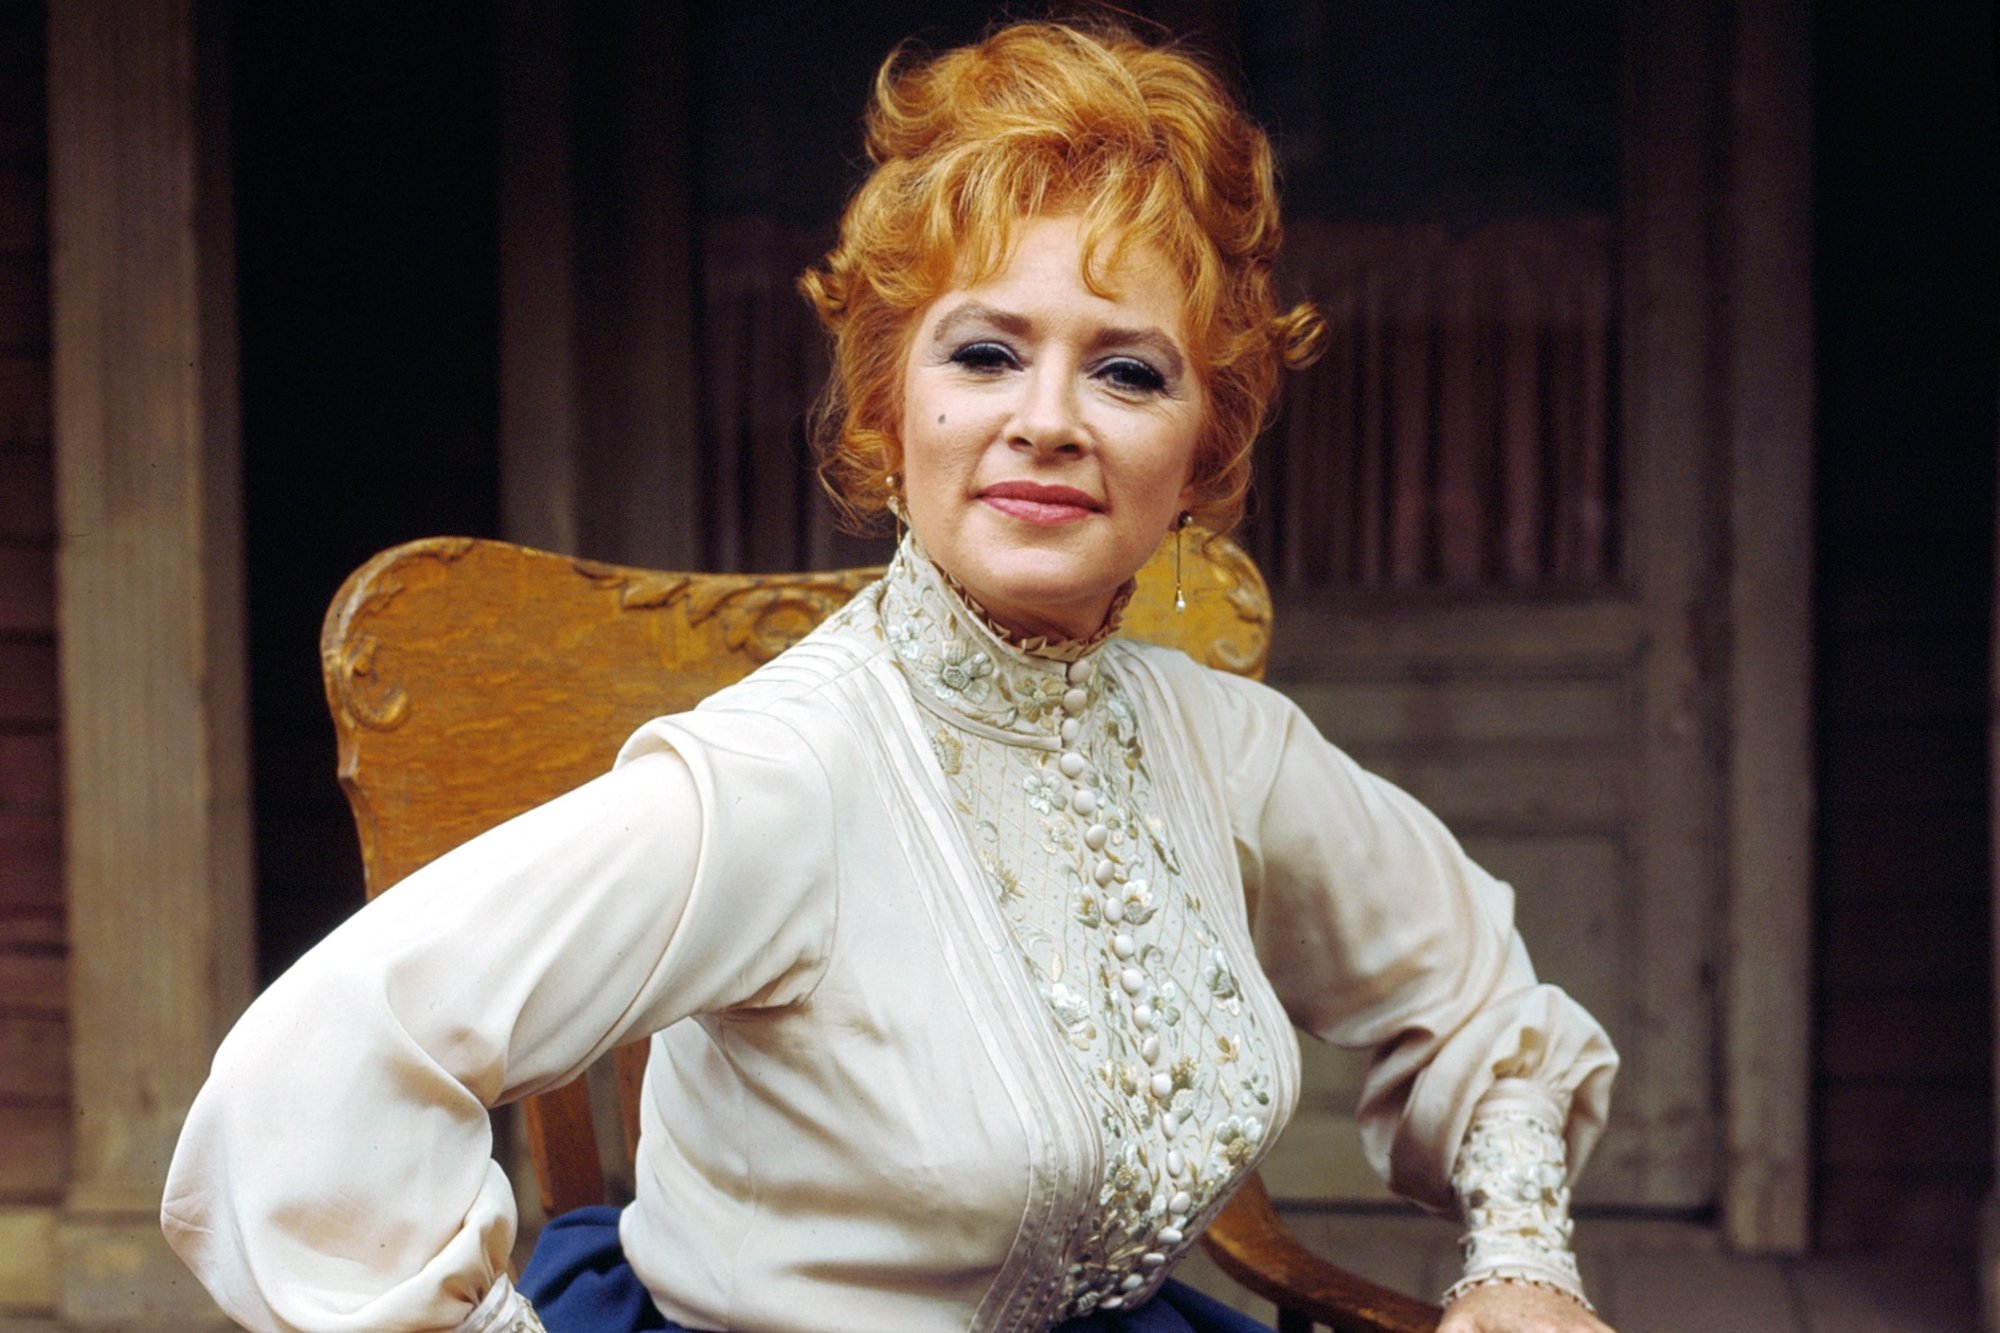 'Gunsmoke' Amanda Blake as Miss Kitty Russell sitting in a wooden chair with her hands on the arms of the chair